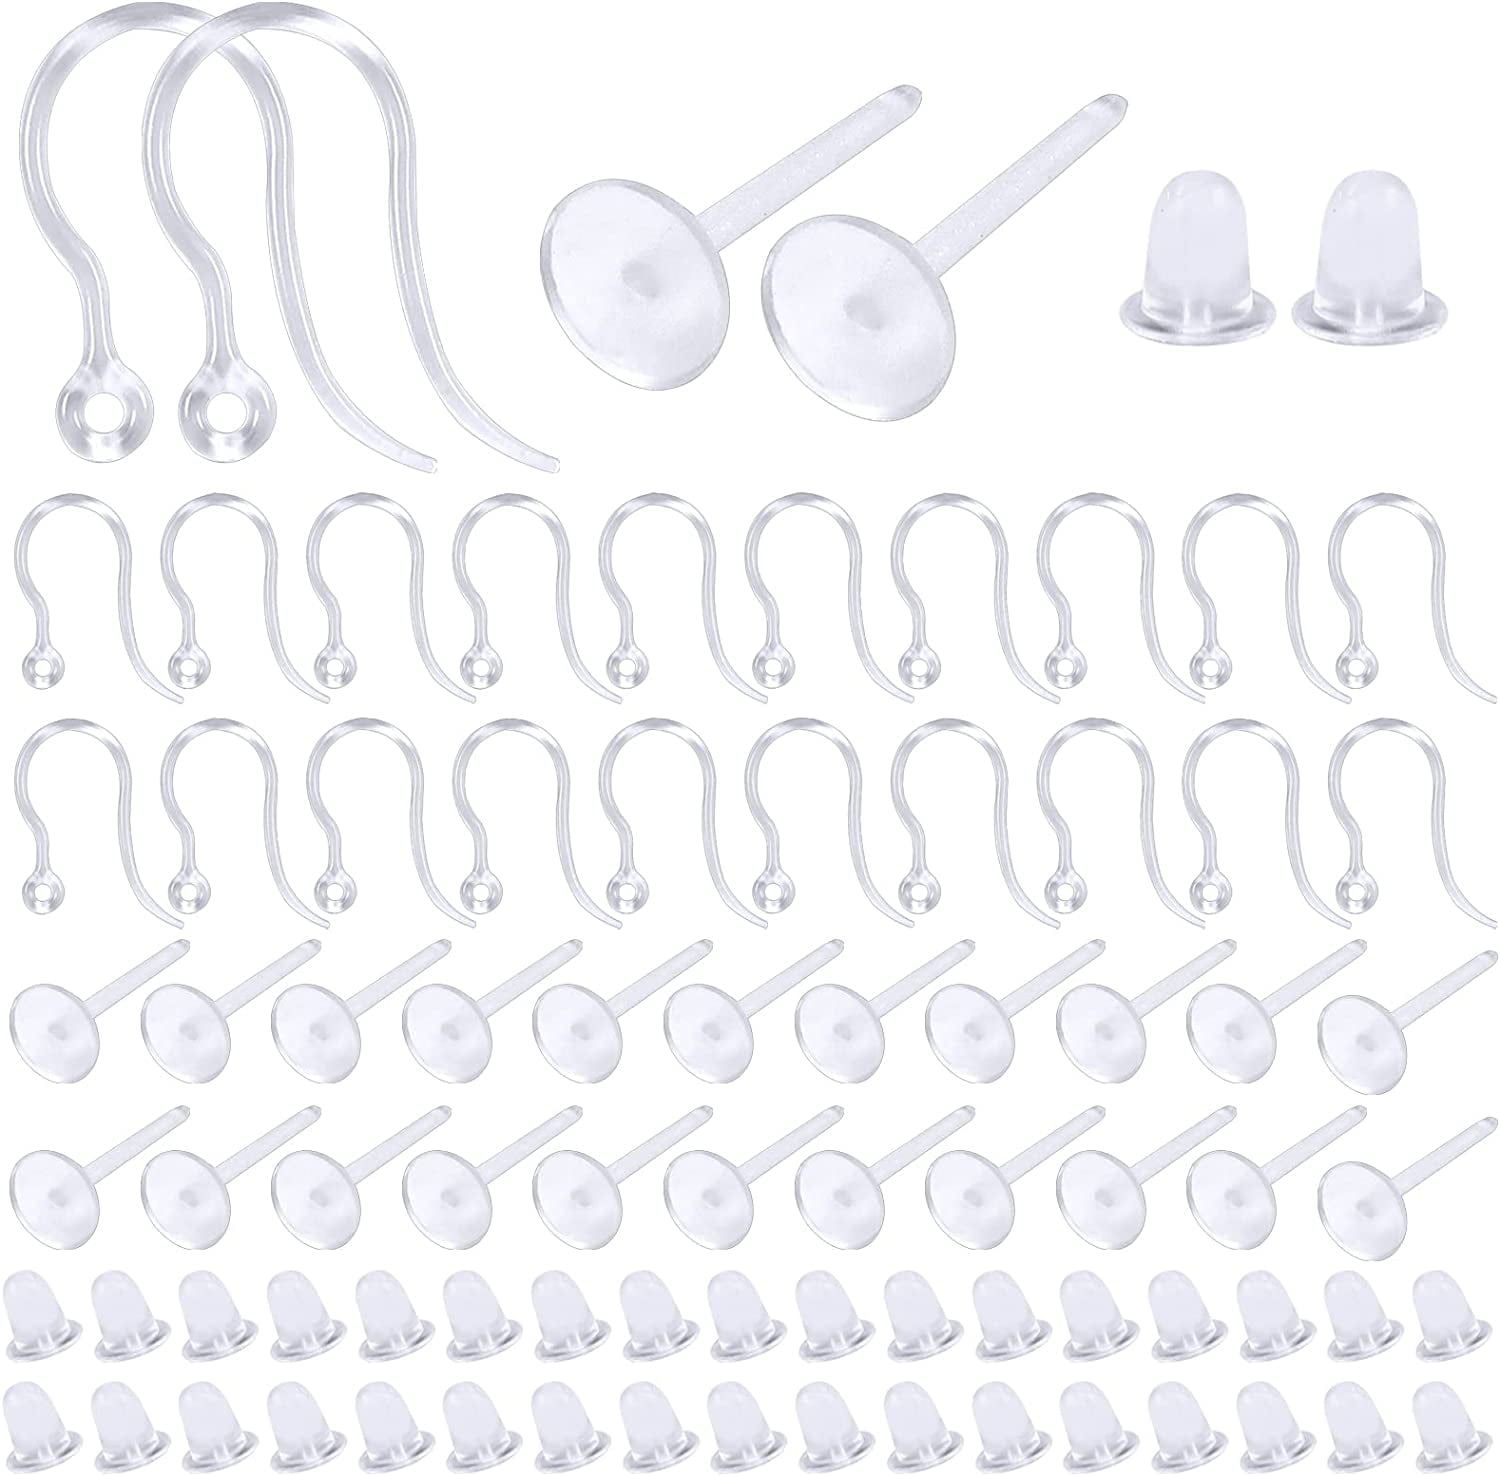 Earring Backs for Sensitive Ears, 200pcs Silicone Clear Earring Backs for  Studs Earring Hooks Hypo-allergenic Earring Stoppers Jewelry Accessories